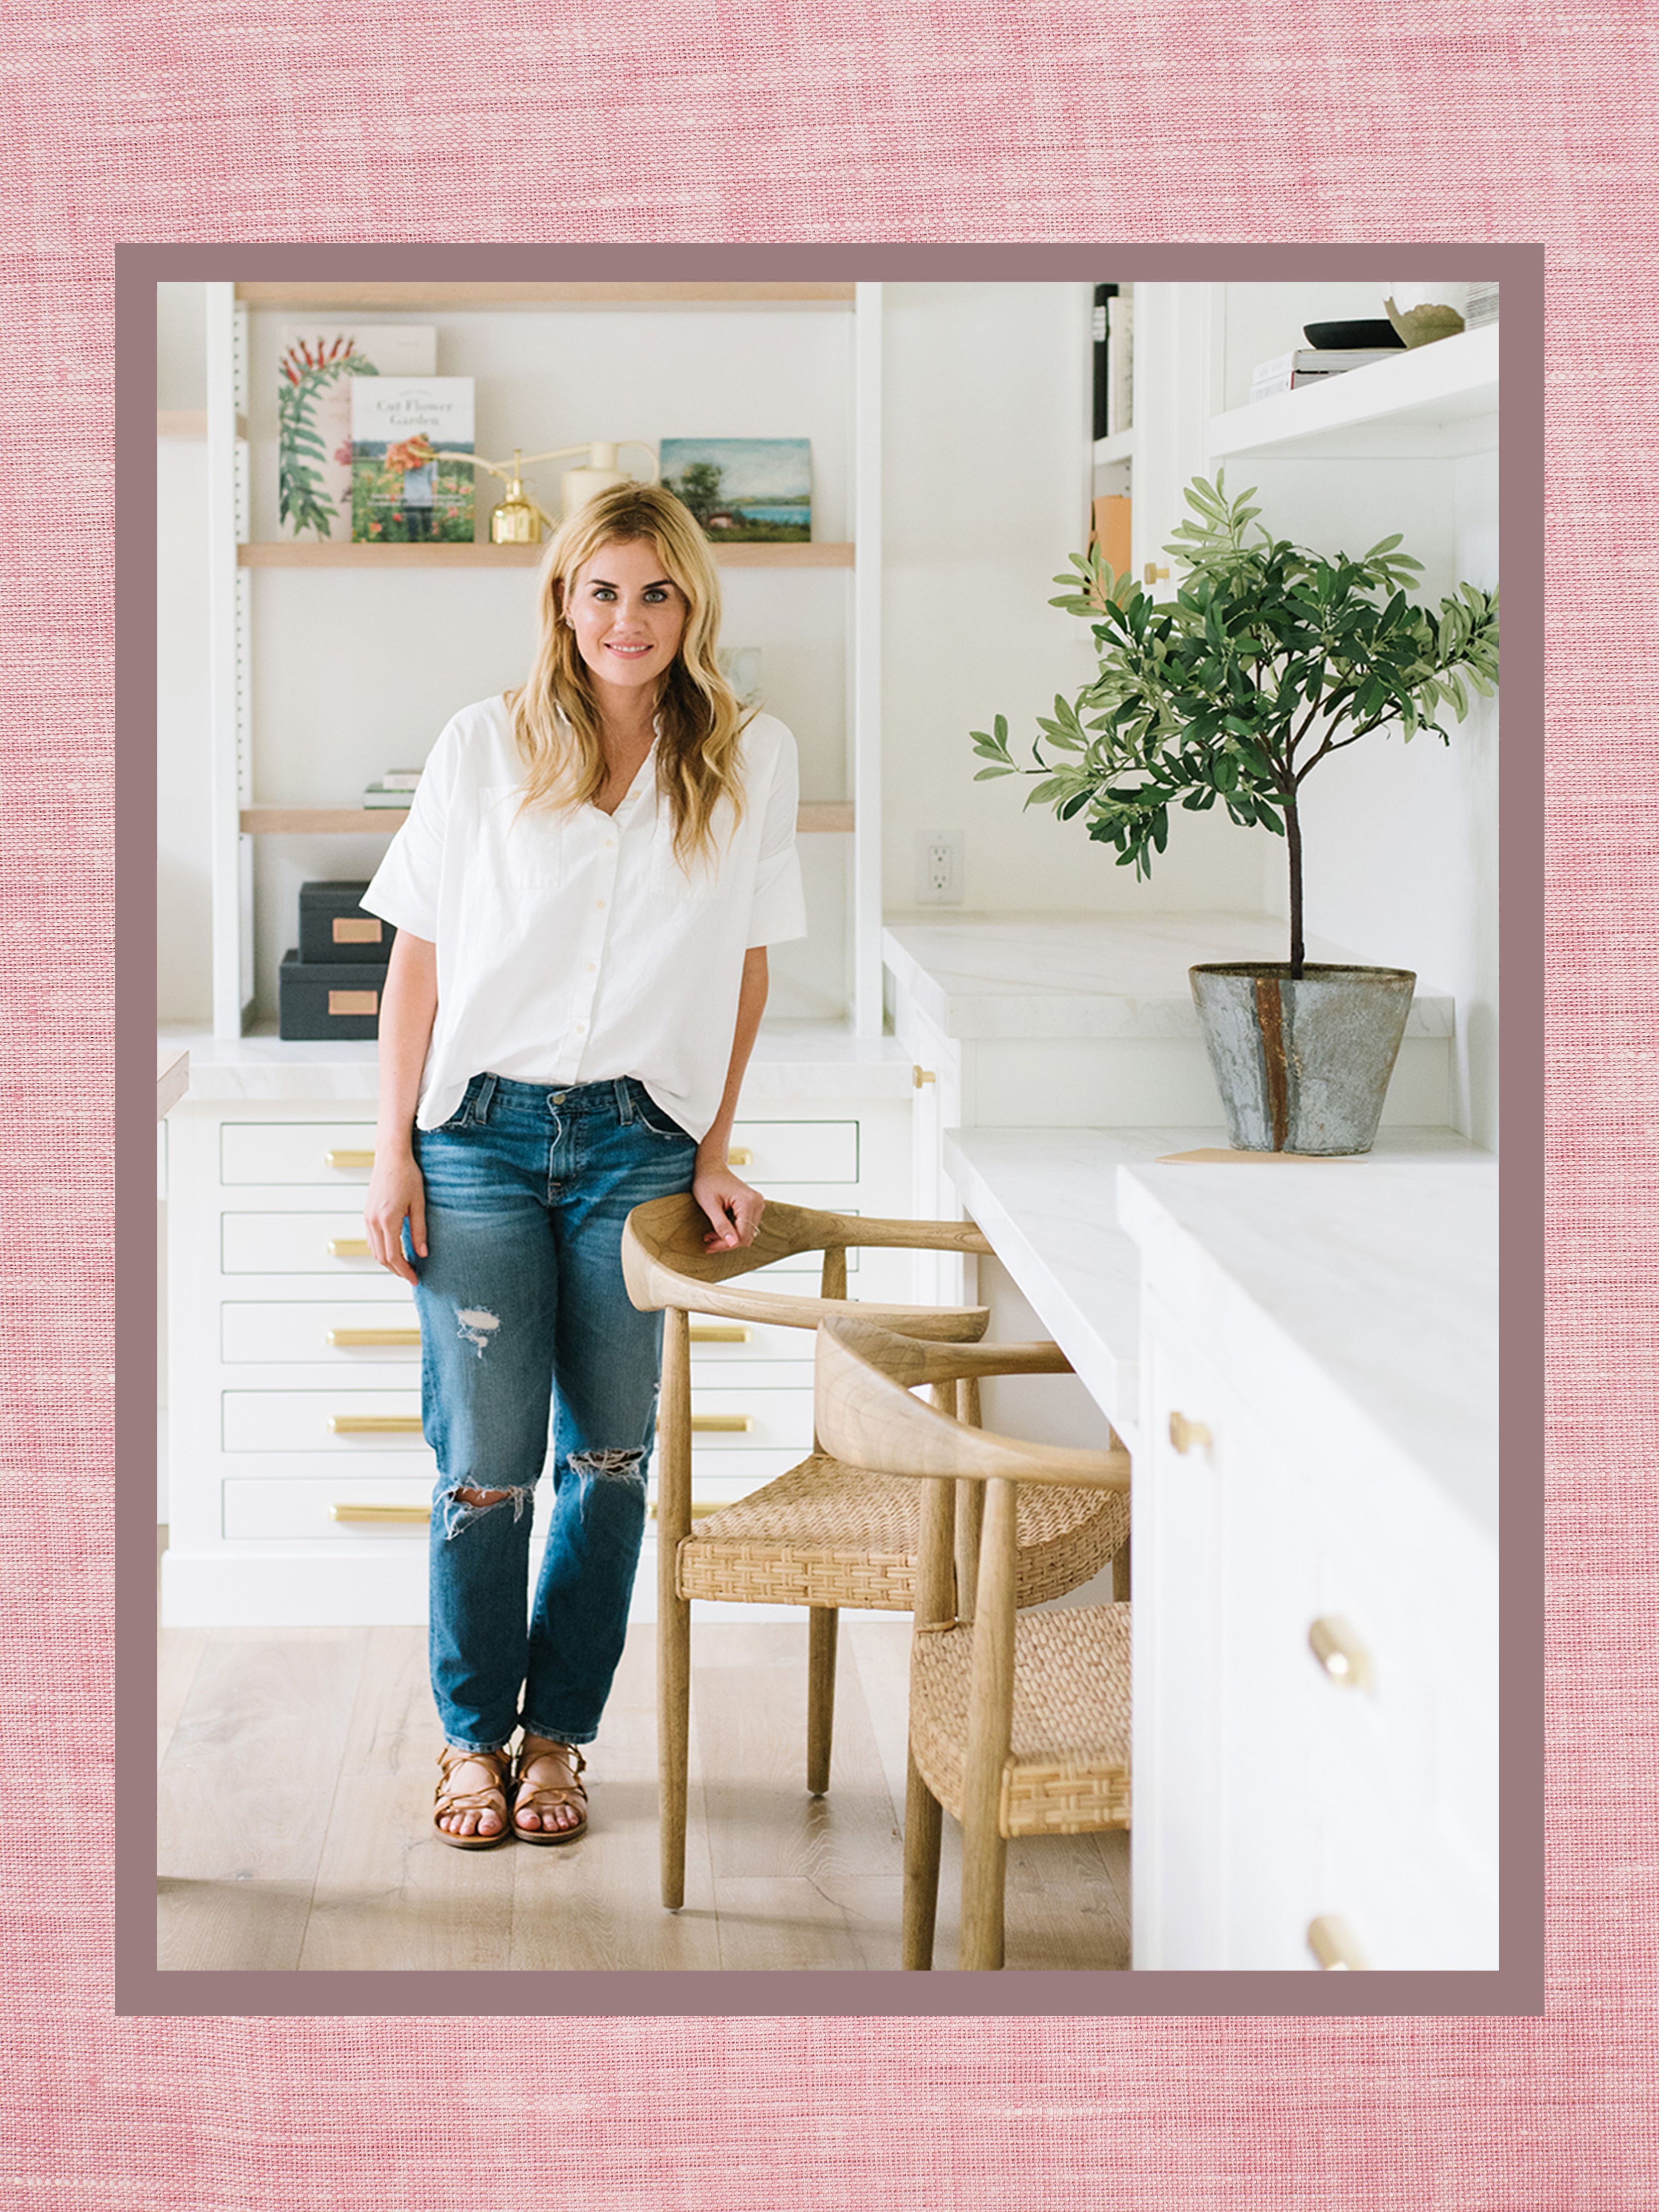 3 Design Ideas to Bookmark From Shea McGee’s Cozy New Office